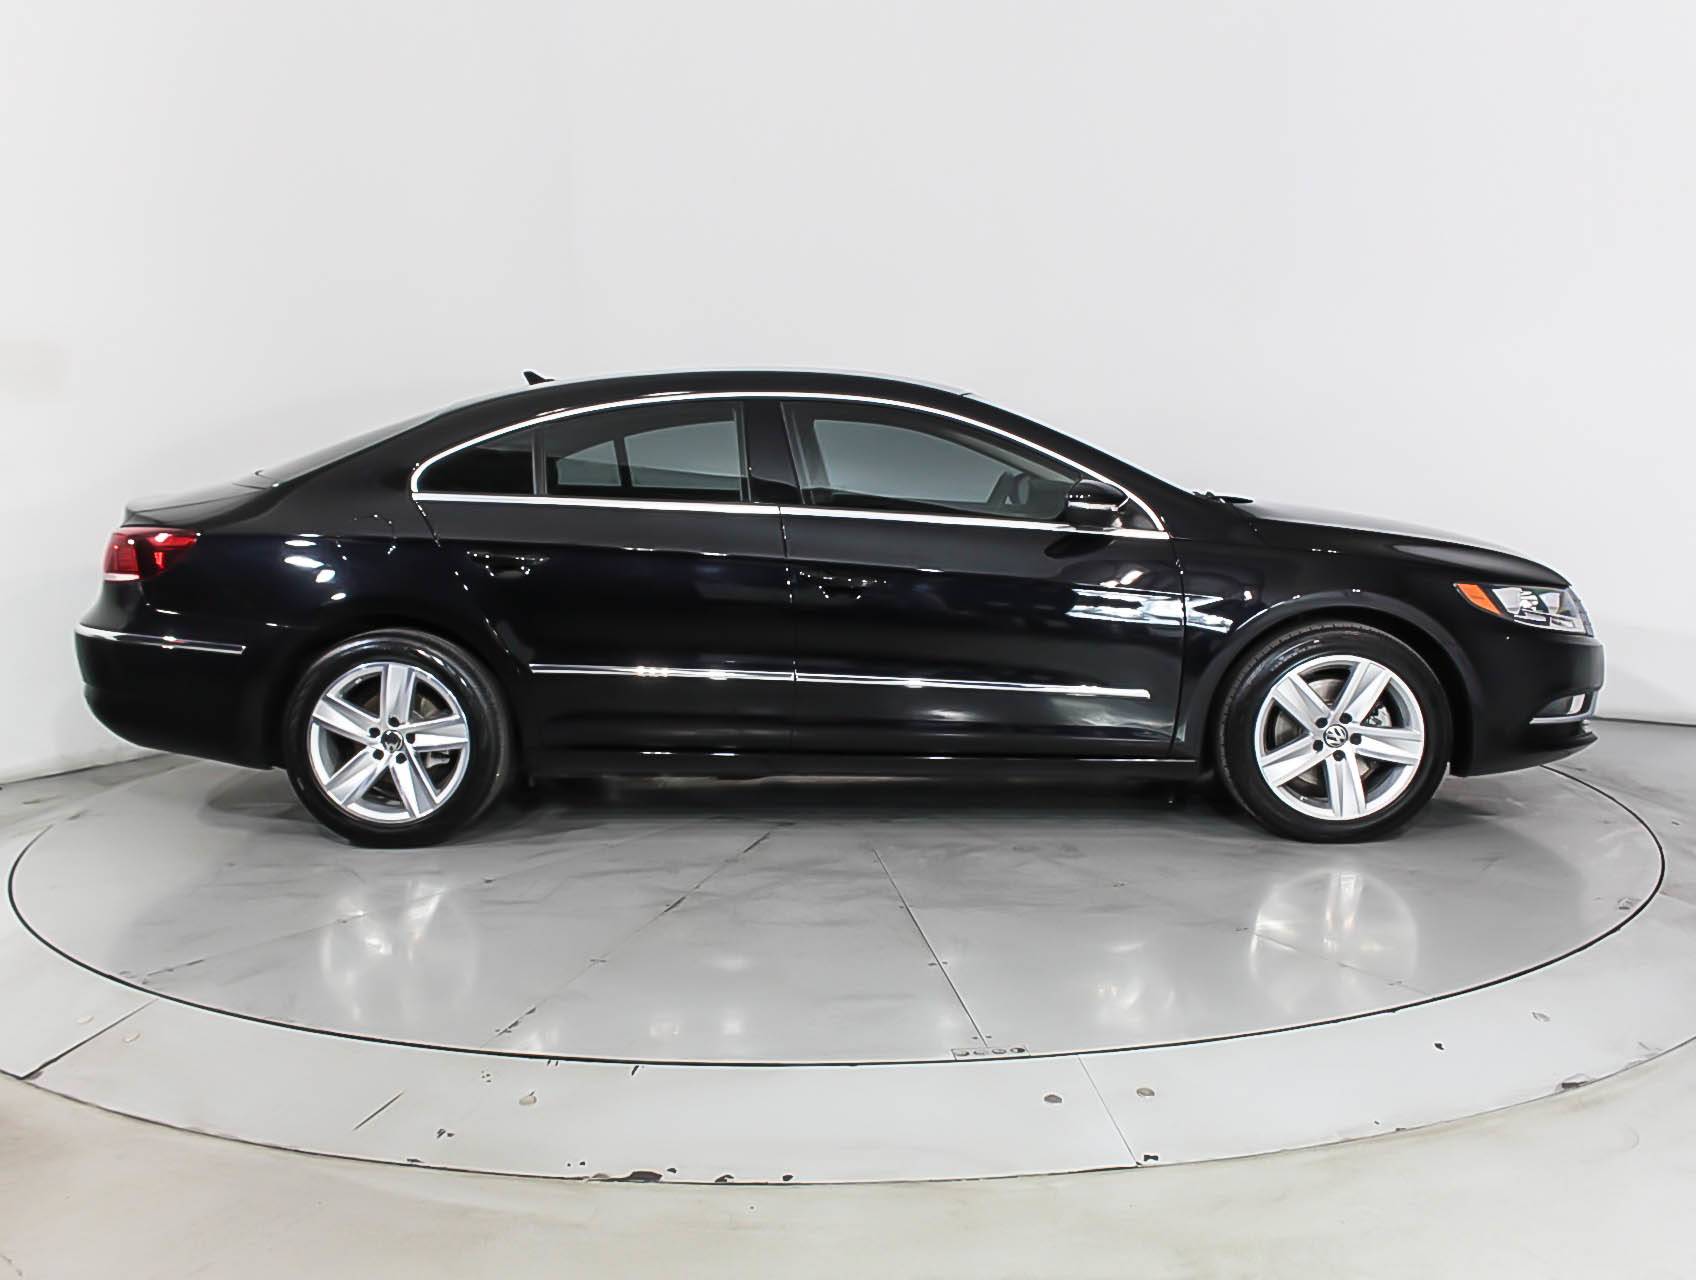 Florida Fine Cars - Used VOLKSWAGEN CC 2015 HOLLYWOOD 2.0T SPORT